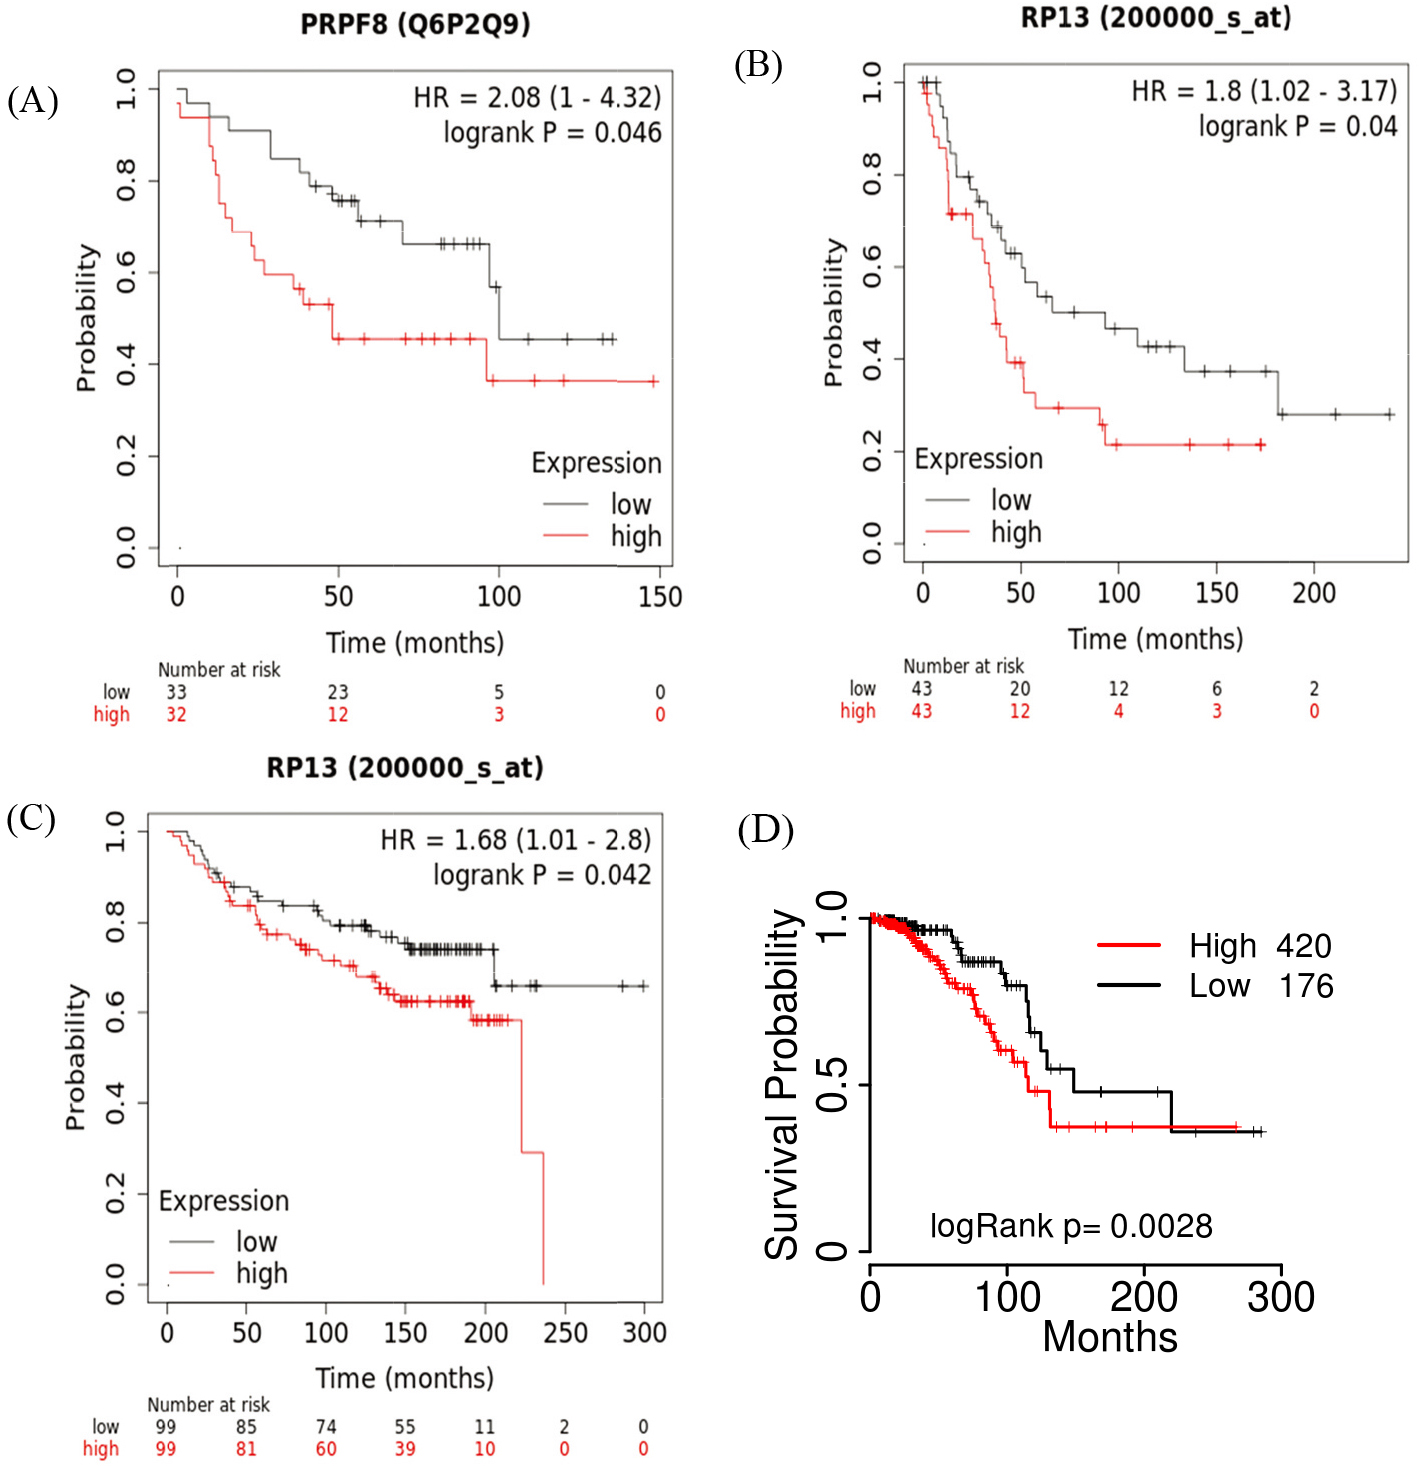 (A) PRPF8 protein levels are associated with the OS of breast cancer patients in Kaplan-Meier plots. (B) The mRNA expression of PRPF8 is associated with the DMFS probabilities of breast patients. (C) The mRNA expression of PRPF8 is associated with the PPS probabilities of breast patients. (D) Prognostic analysis of PRPF8 with mRNA expression in luminal A patients. 